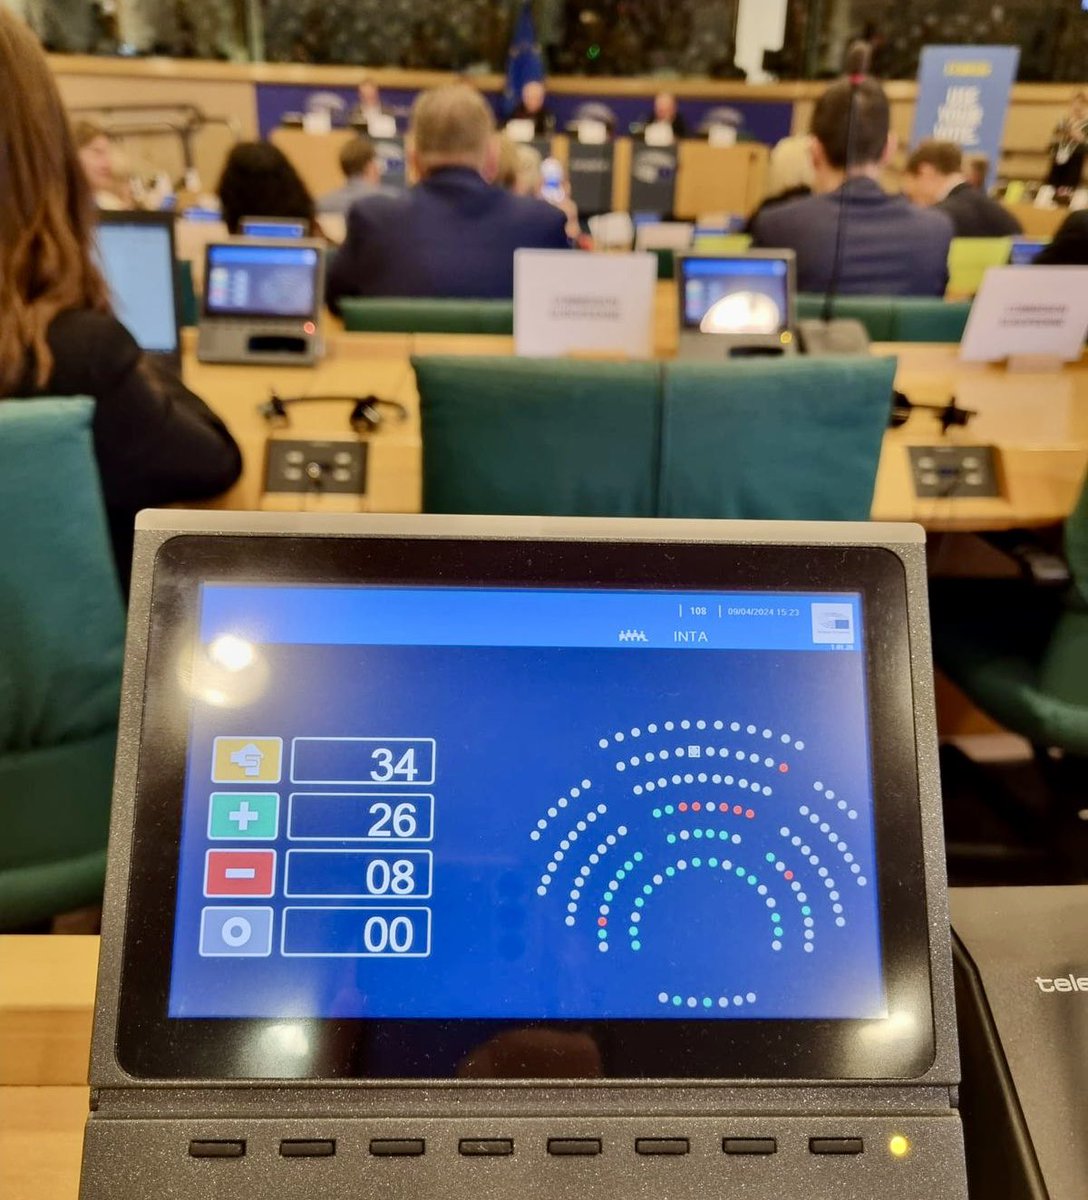 After COREPER's approval @EP_Trade convincingly voted in favour of extension of EU trade liberalisation for 🇺🇦.
Thankful to @berndlange @Kalniete & INTA for support of Ukraine, promotion of 🇺🇦🇪🇺 free trade & devotion to EU Internal Marklet principles.